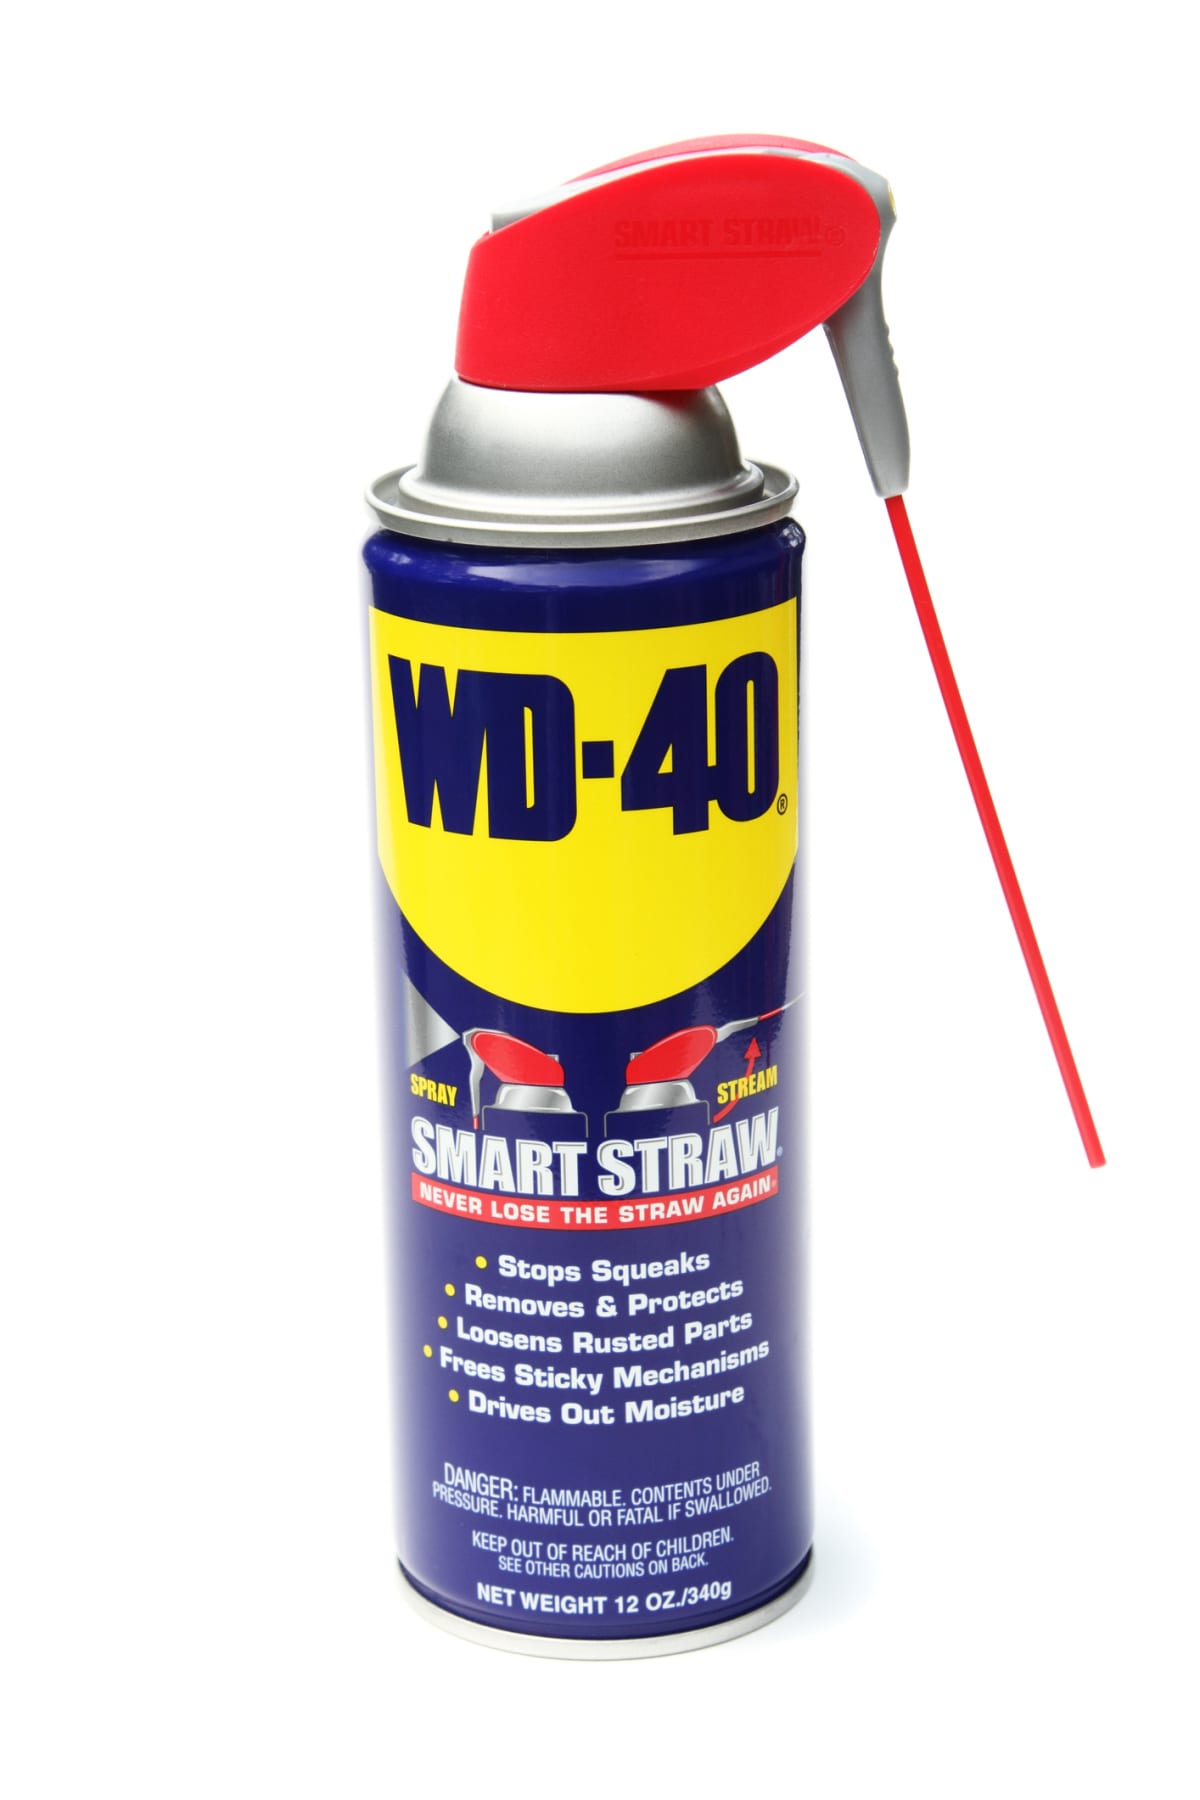 Product shot of a spray can of WD-40